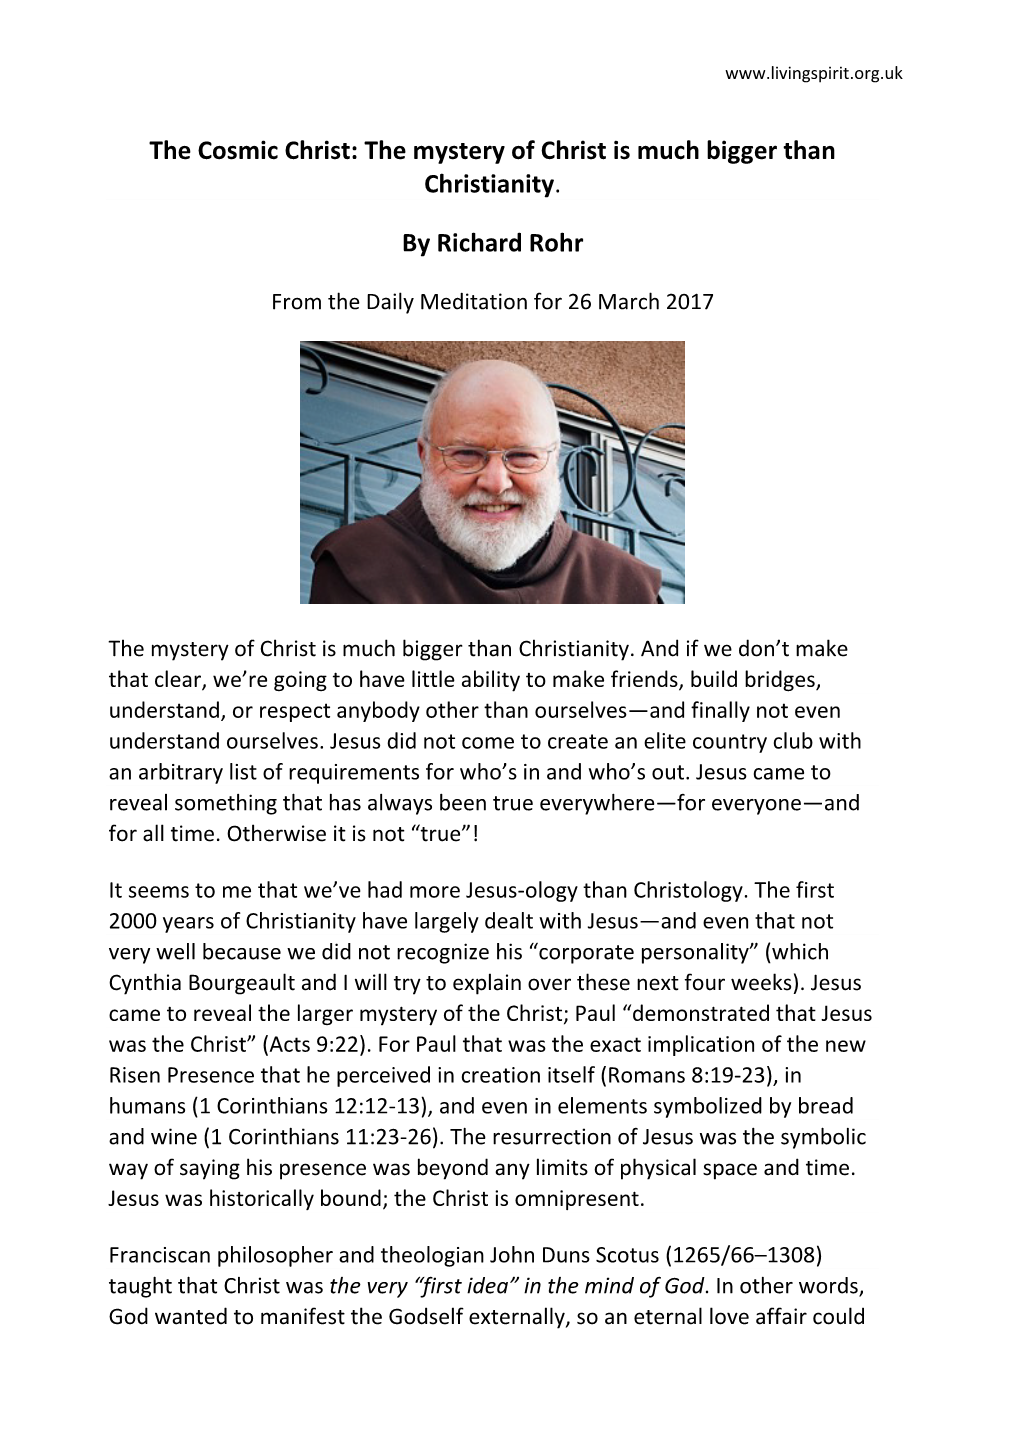 The Mystery of Christ Is Much Bigger Than Christianity. by Richard Rohr